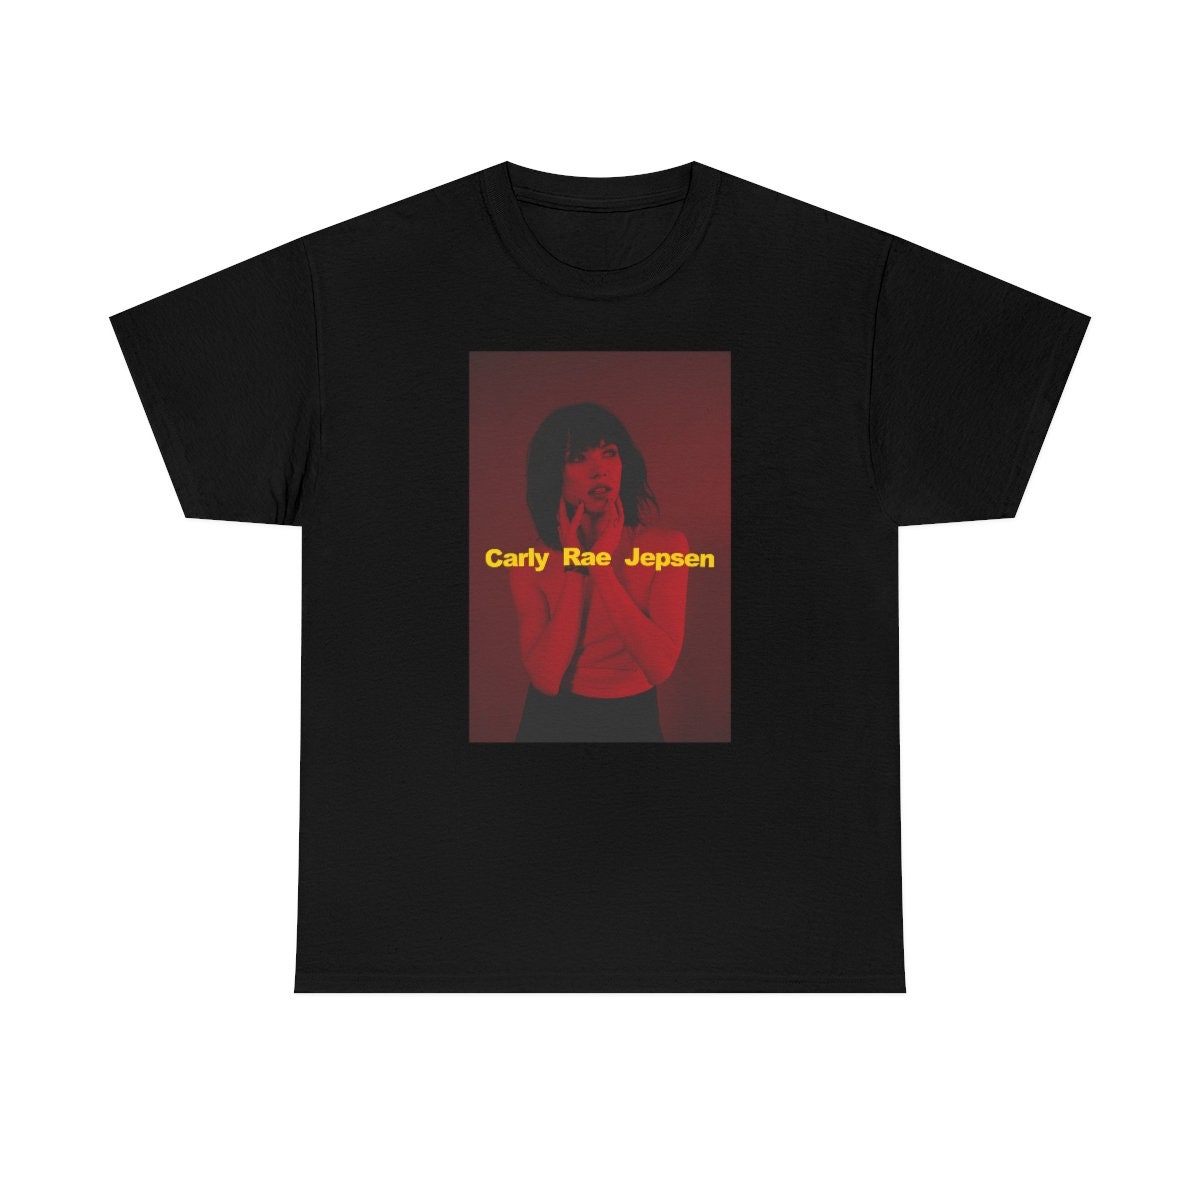 Discover Carly Rae Jepsen shirt, The Loneliest Time New Album T-Shirt